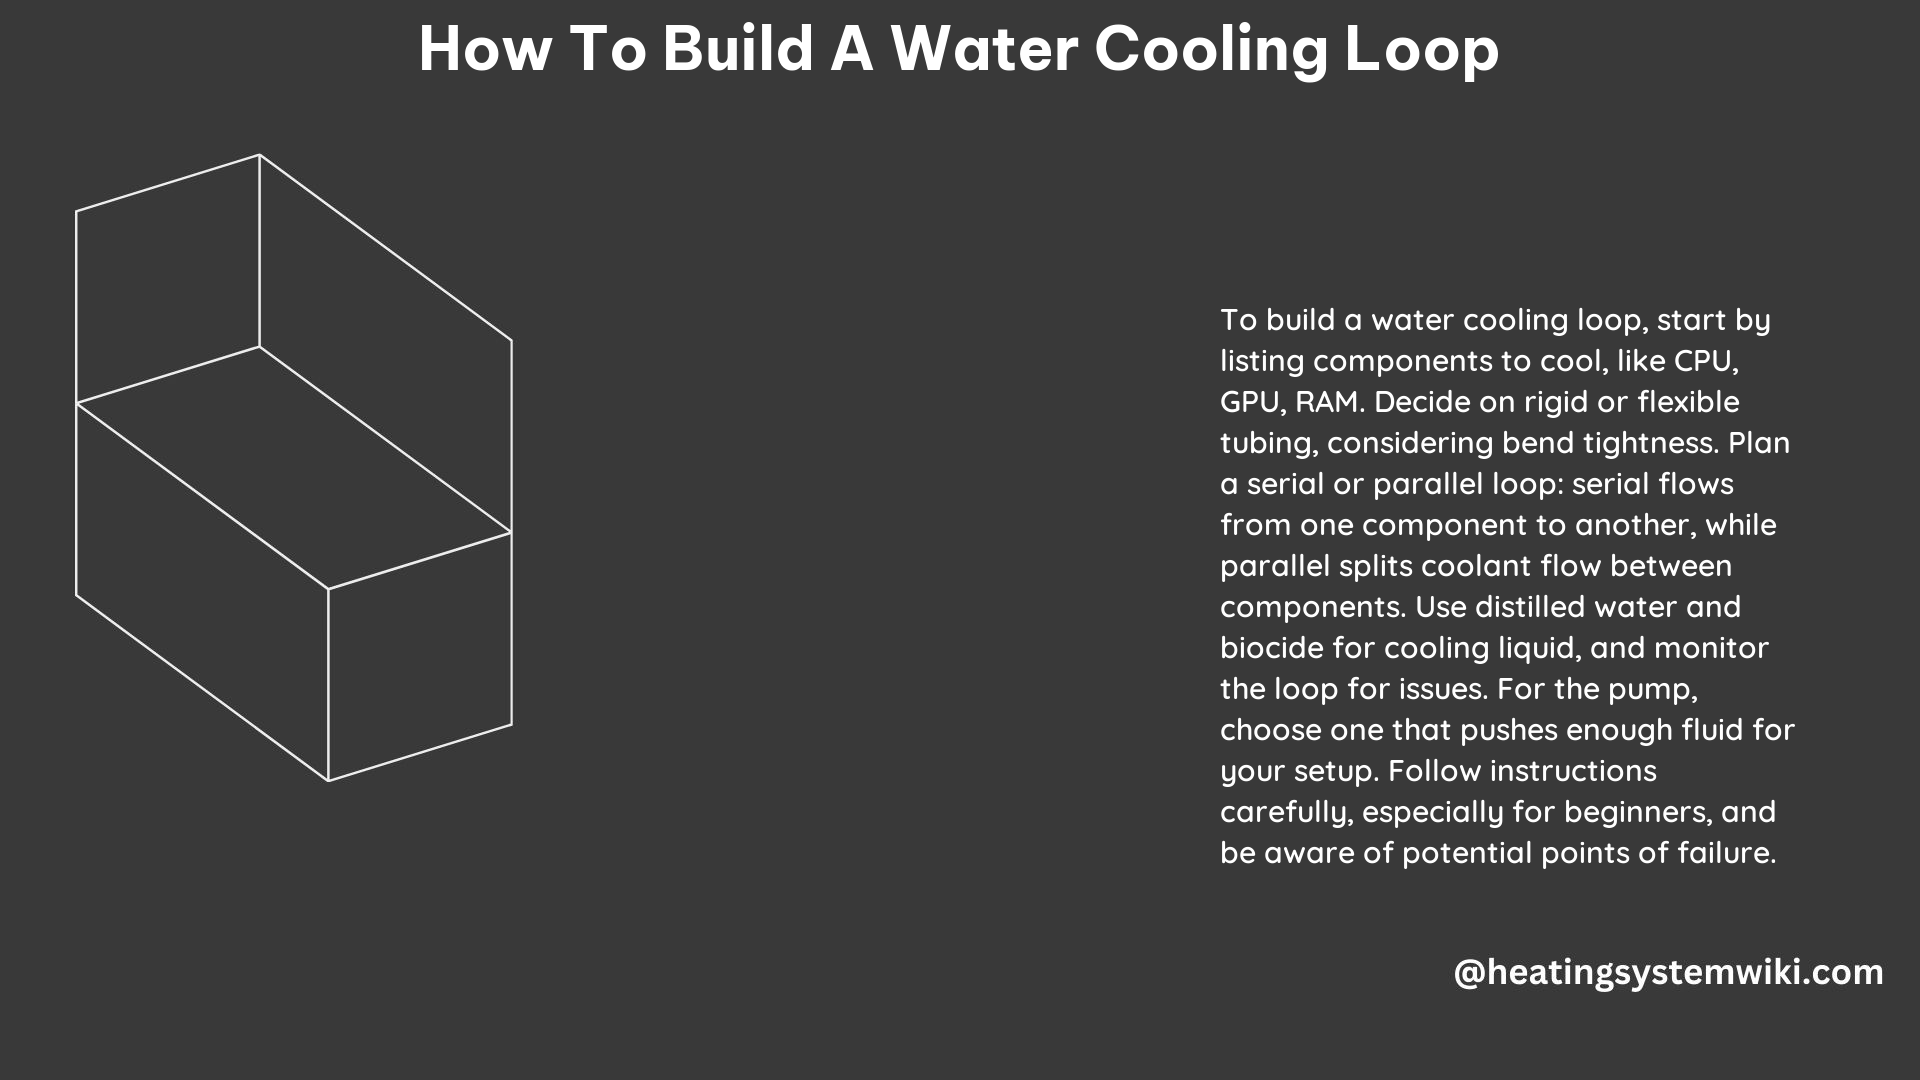 How to Build a Water Cooling Loop